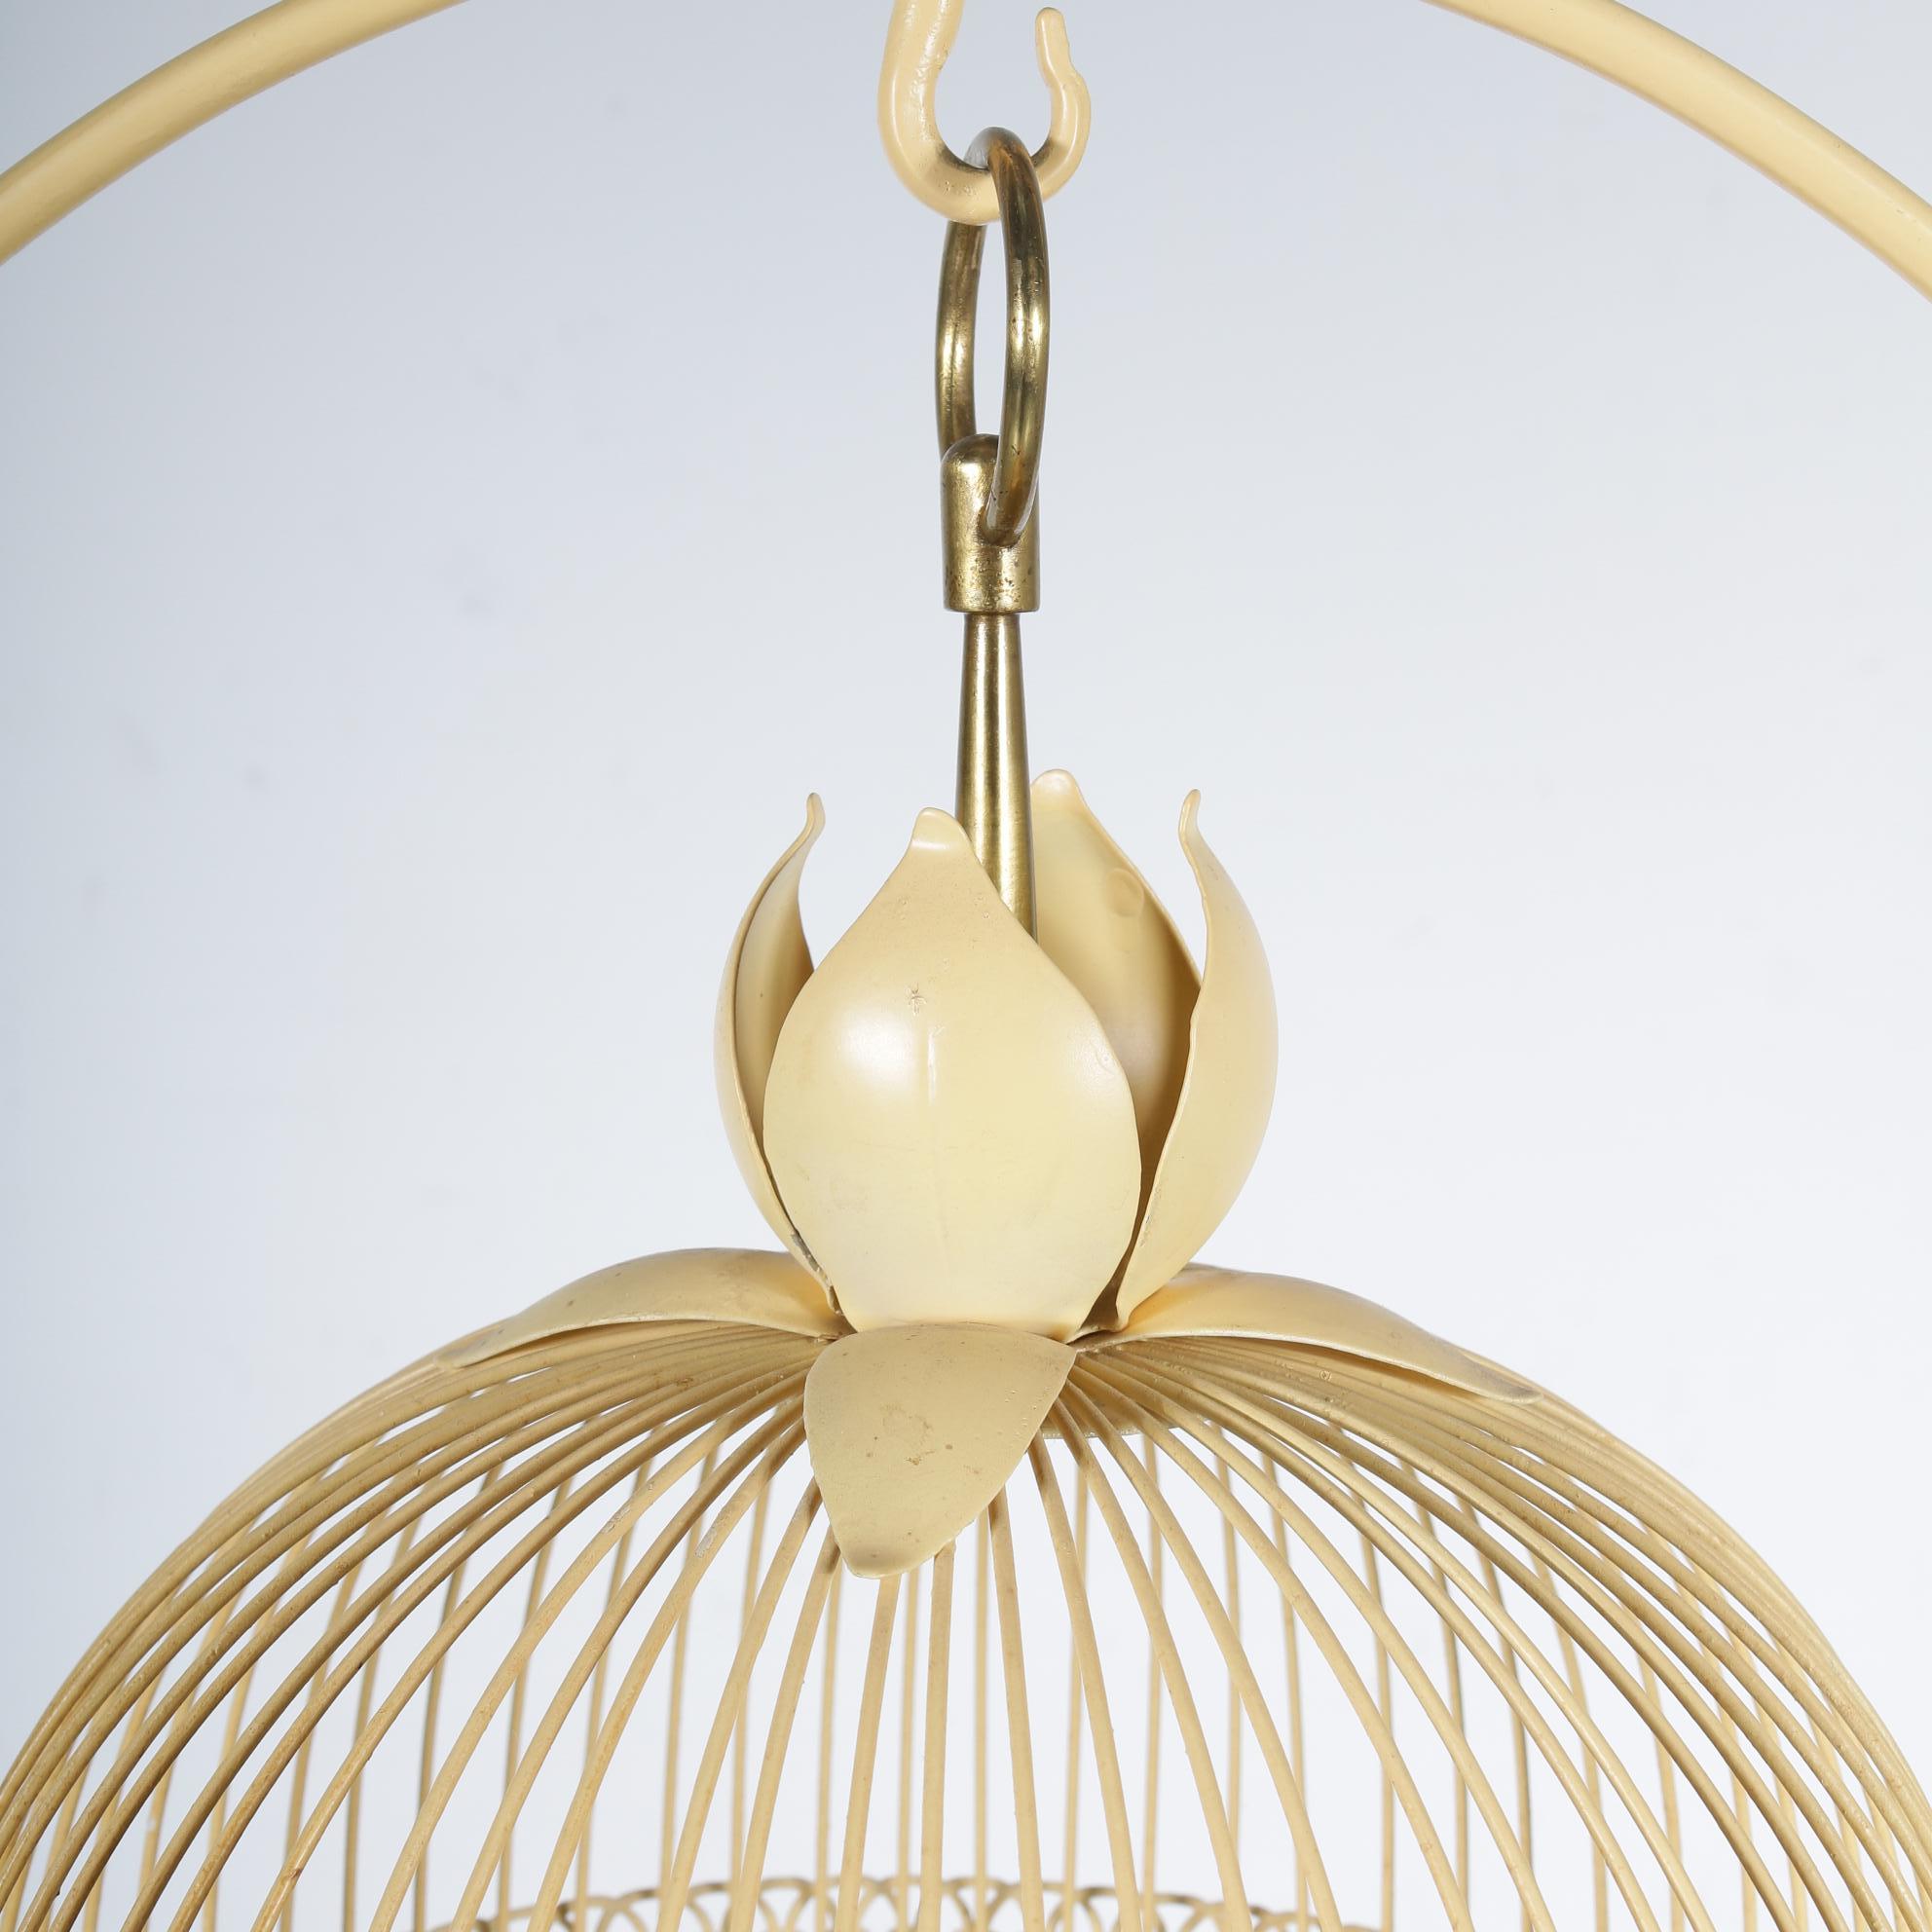 A beautiful metal bird cage on a highly decorative stand, manufactured in France, circa 1950.

This eye-catching piece is made of yellow lacquered metal in a wonderful style, designed with great eye for detail. The cage itself has a flower shape